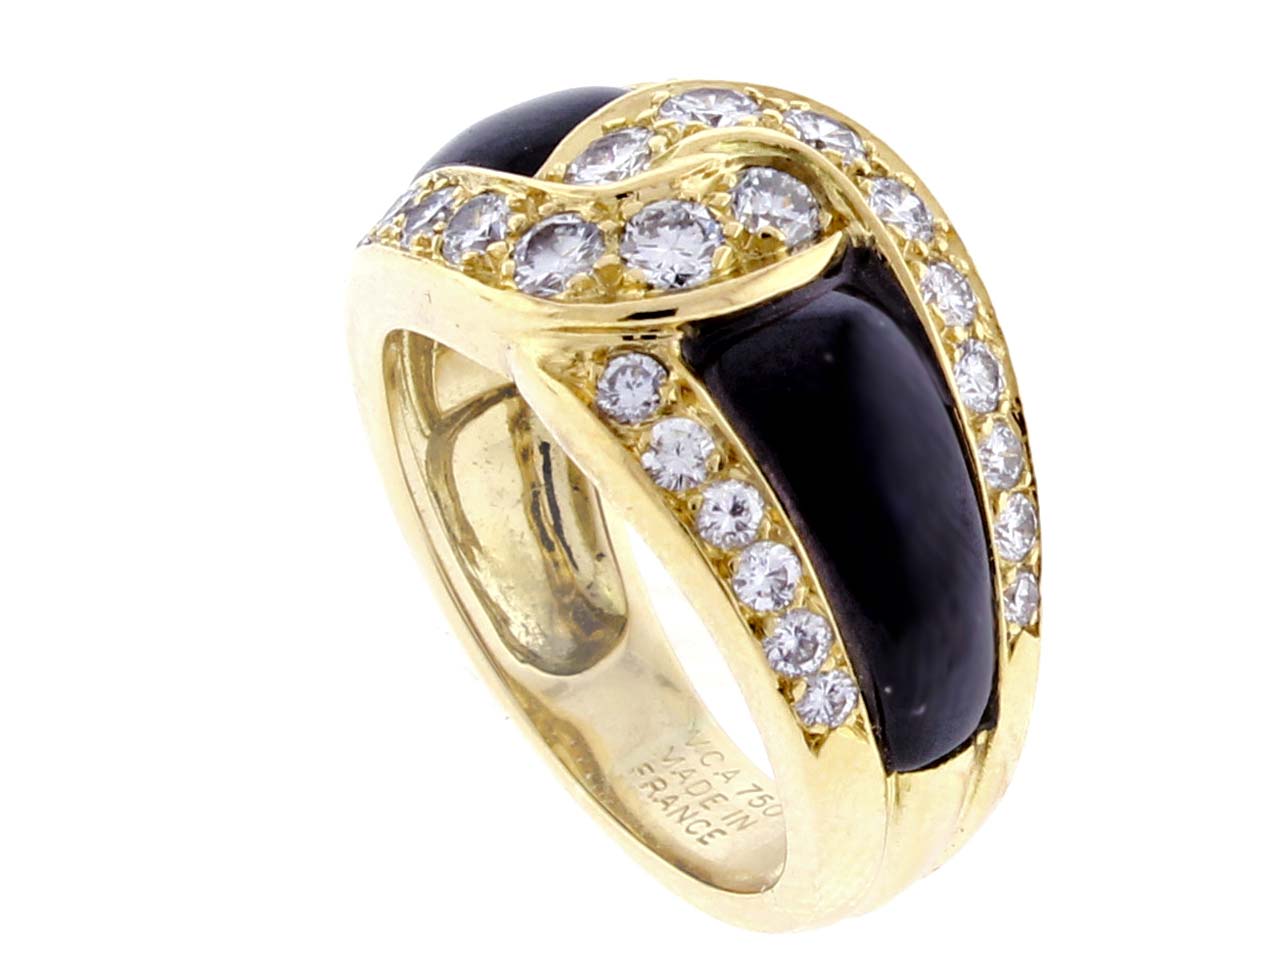 Van Cleef & Arpels Onyx and Diamond Ring | Pampillonia Jewelers ...